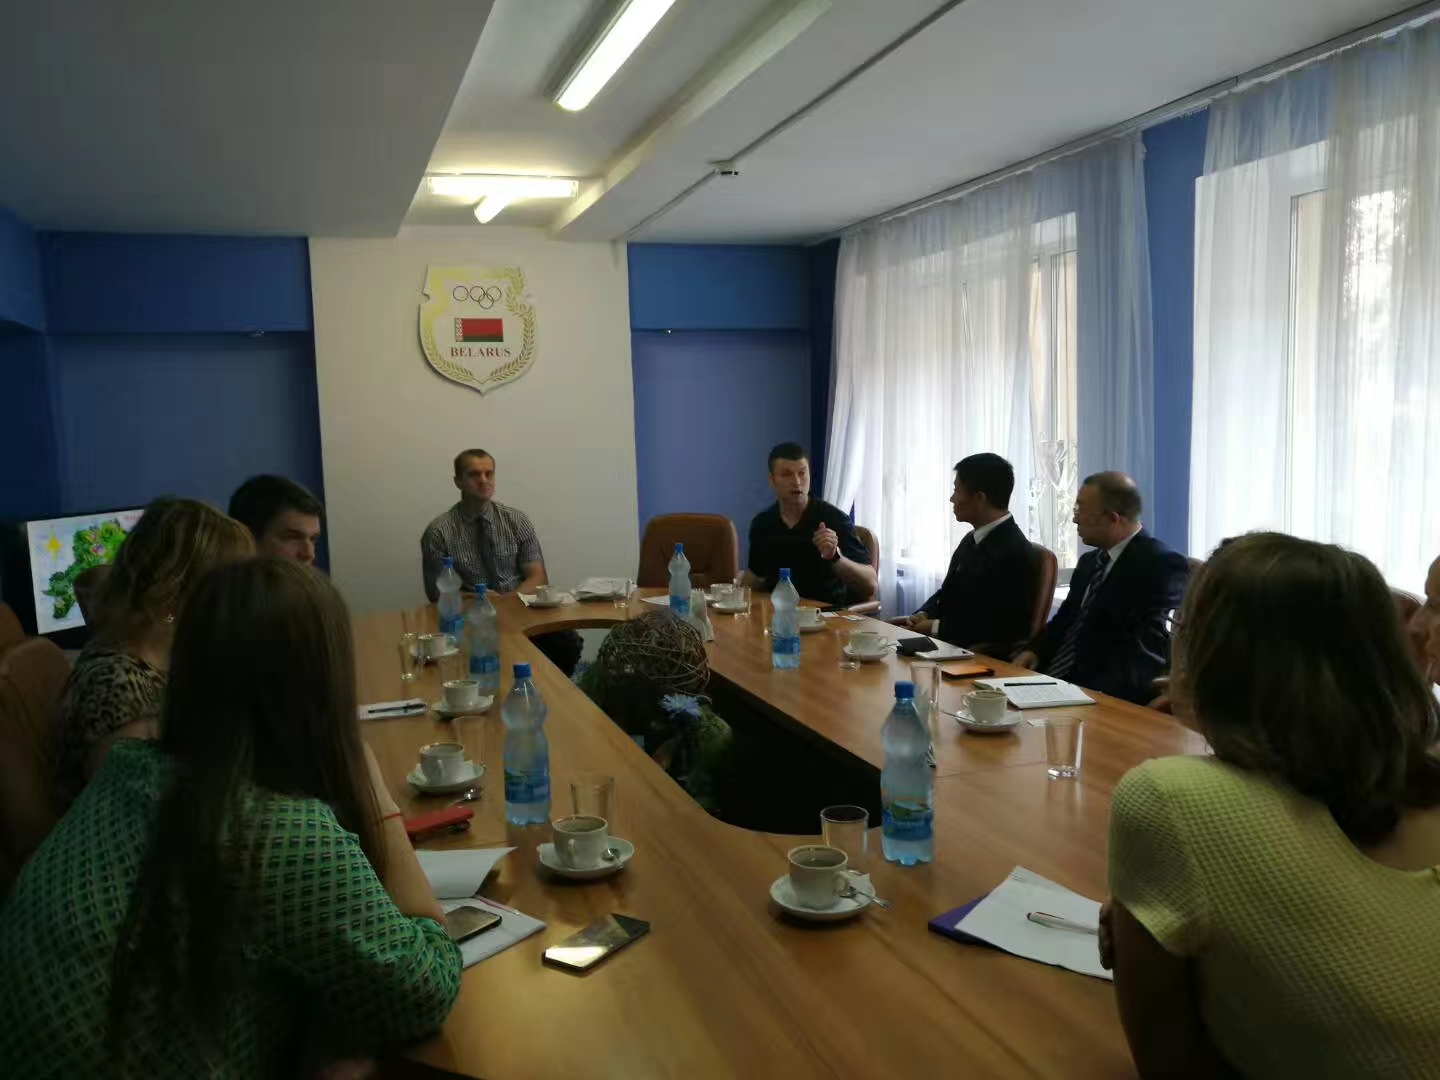 A visit to Belarussian Regional Travel and Tourism Administration